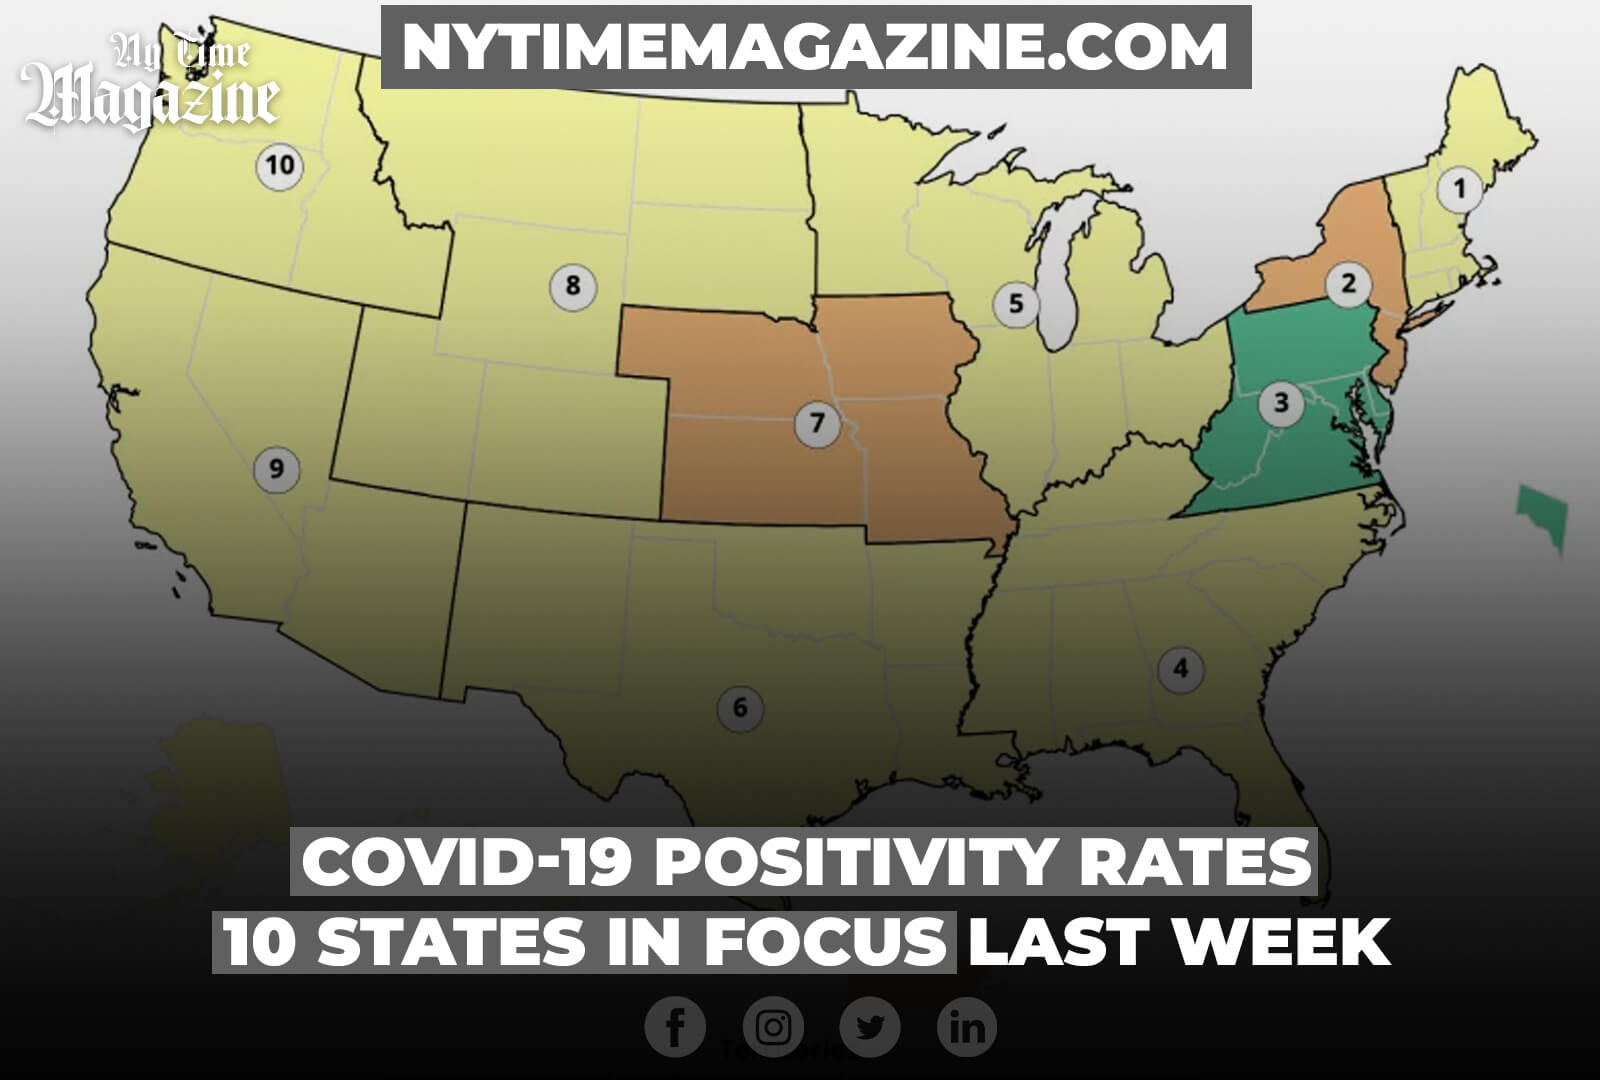 COVID-19 Positivity Rates: 10 States in Focus Last Week